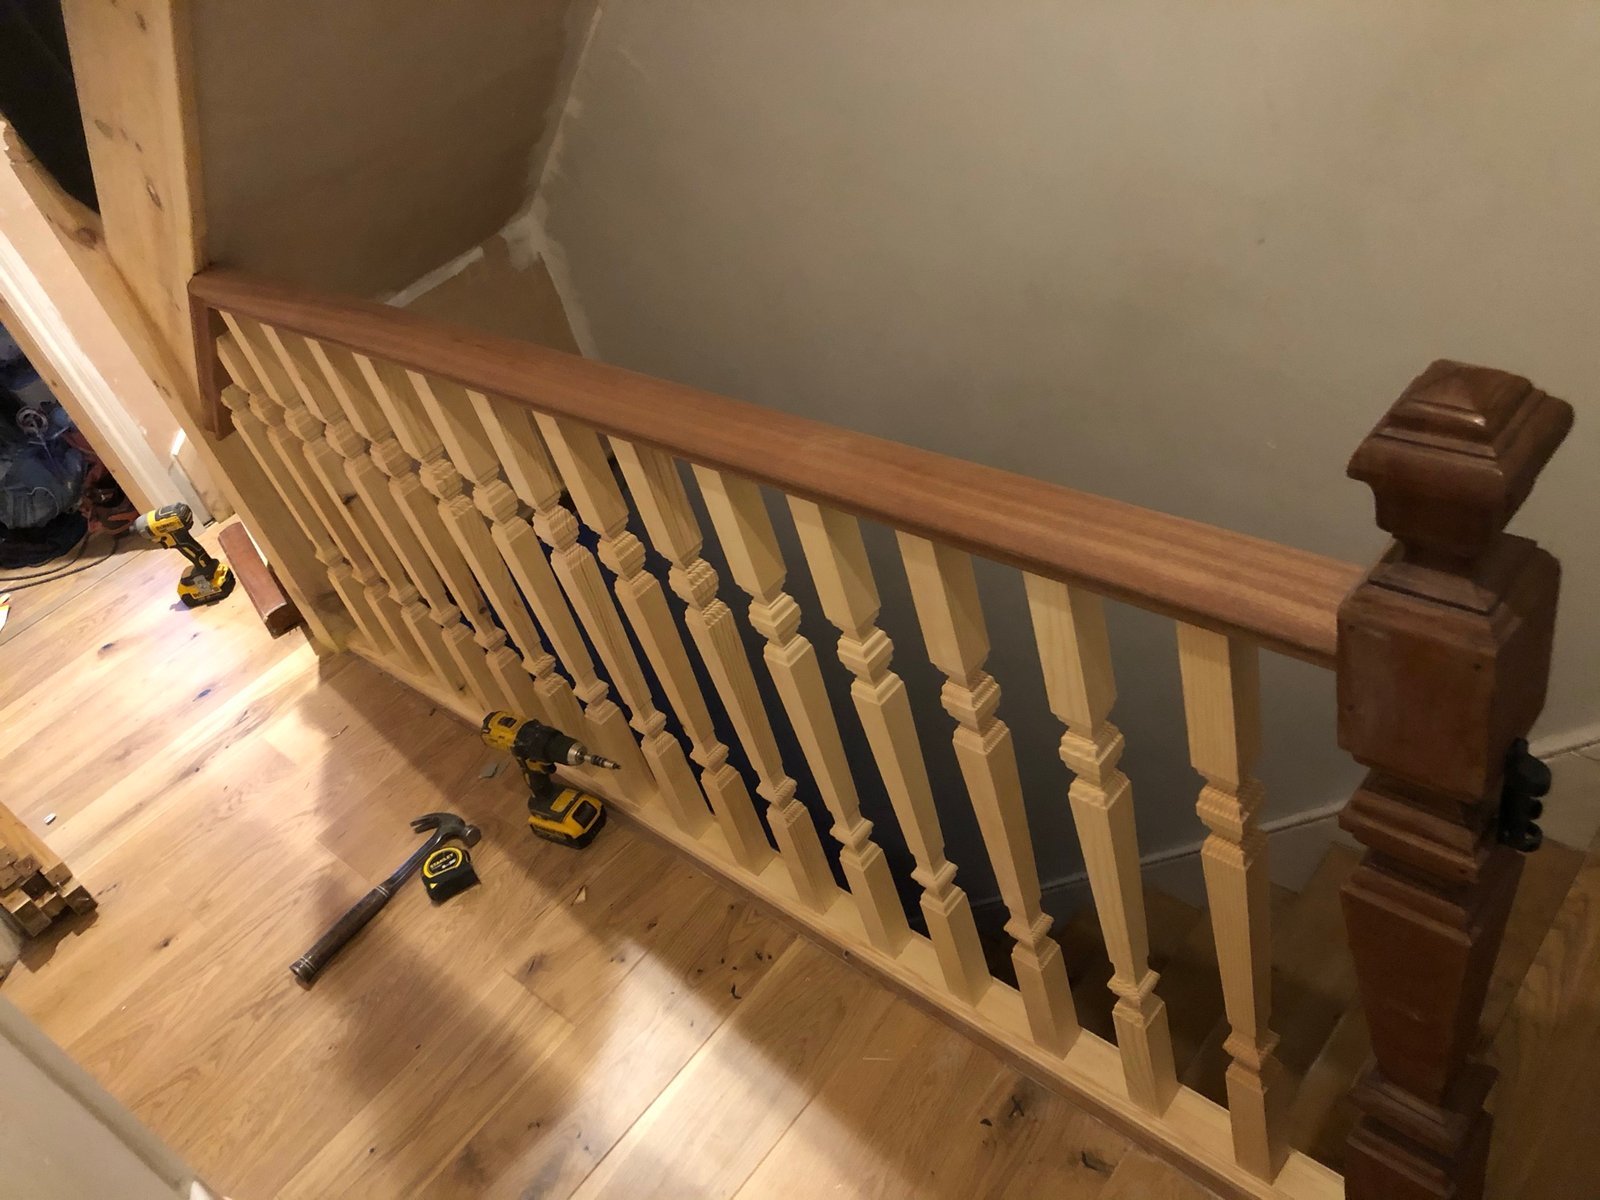 Stair Installations, Rails and Bannisters NJ Carpentry